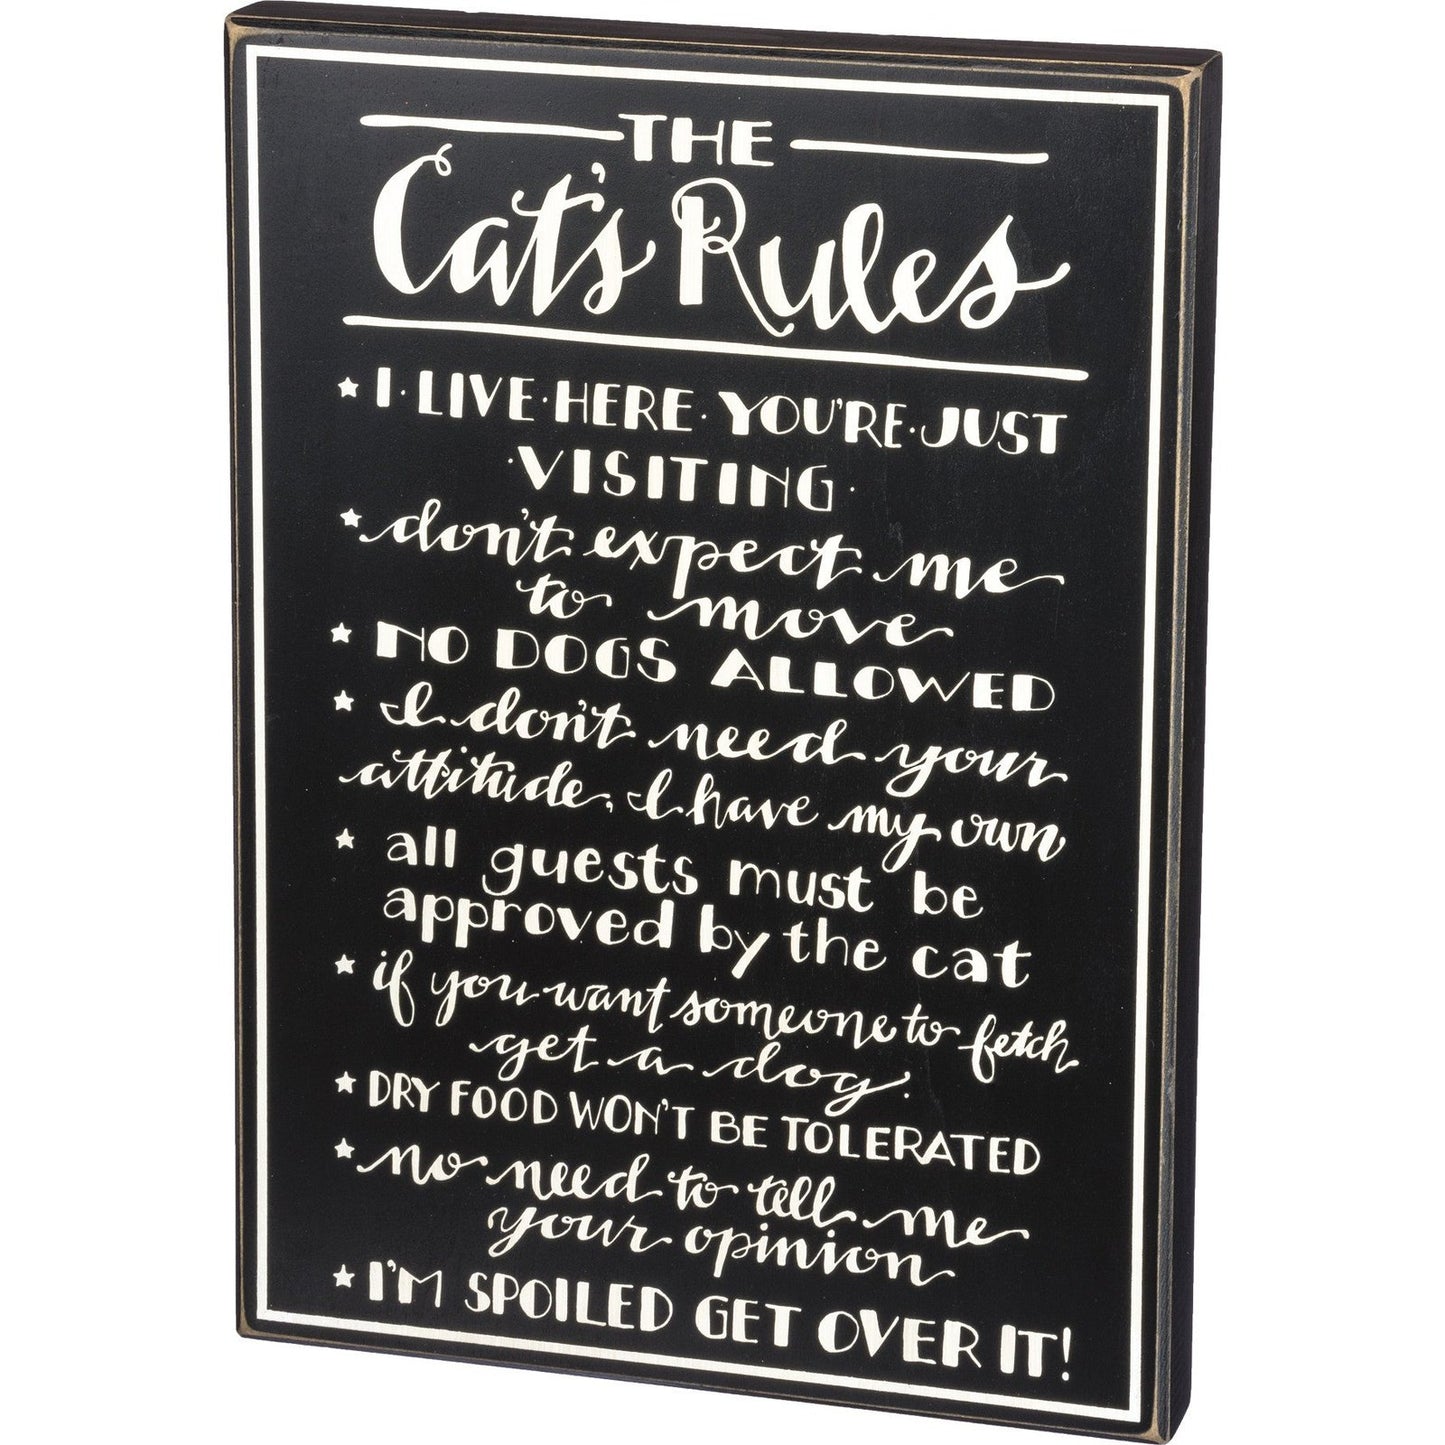 Cats Rules Wall Sign SolagoHome